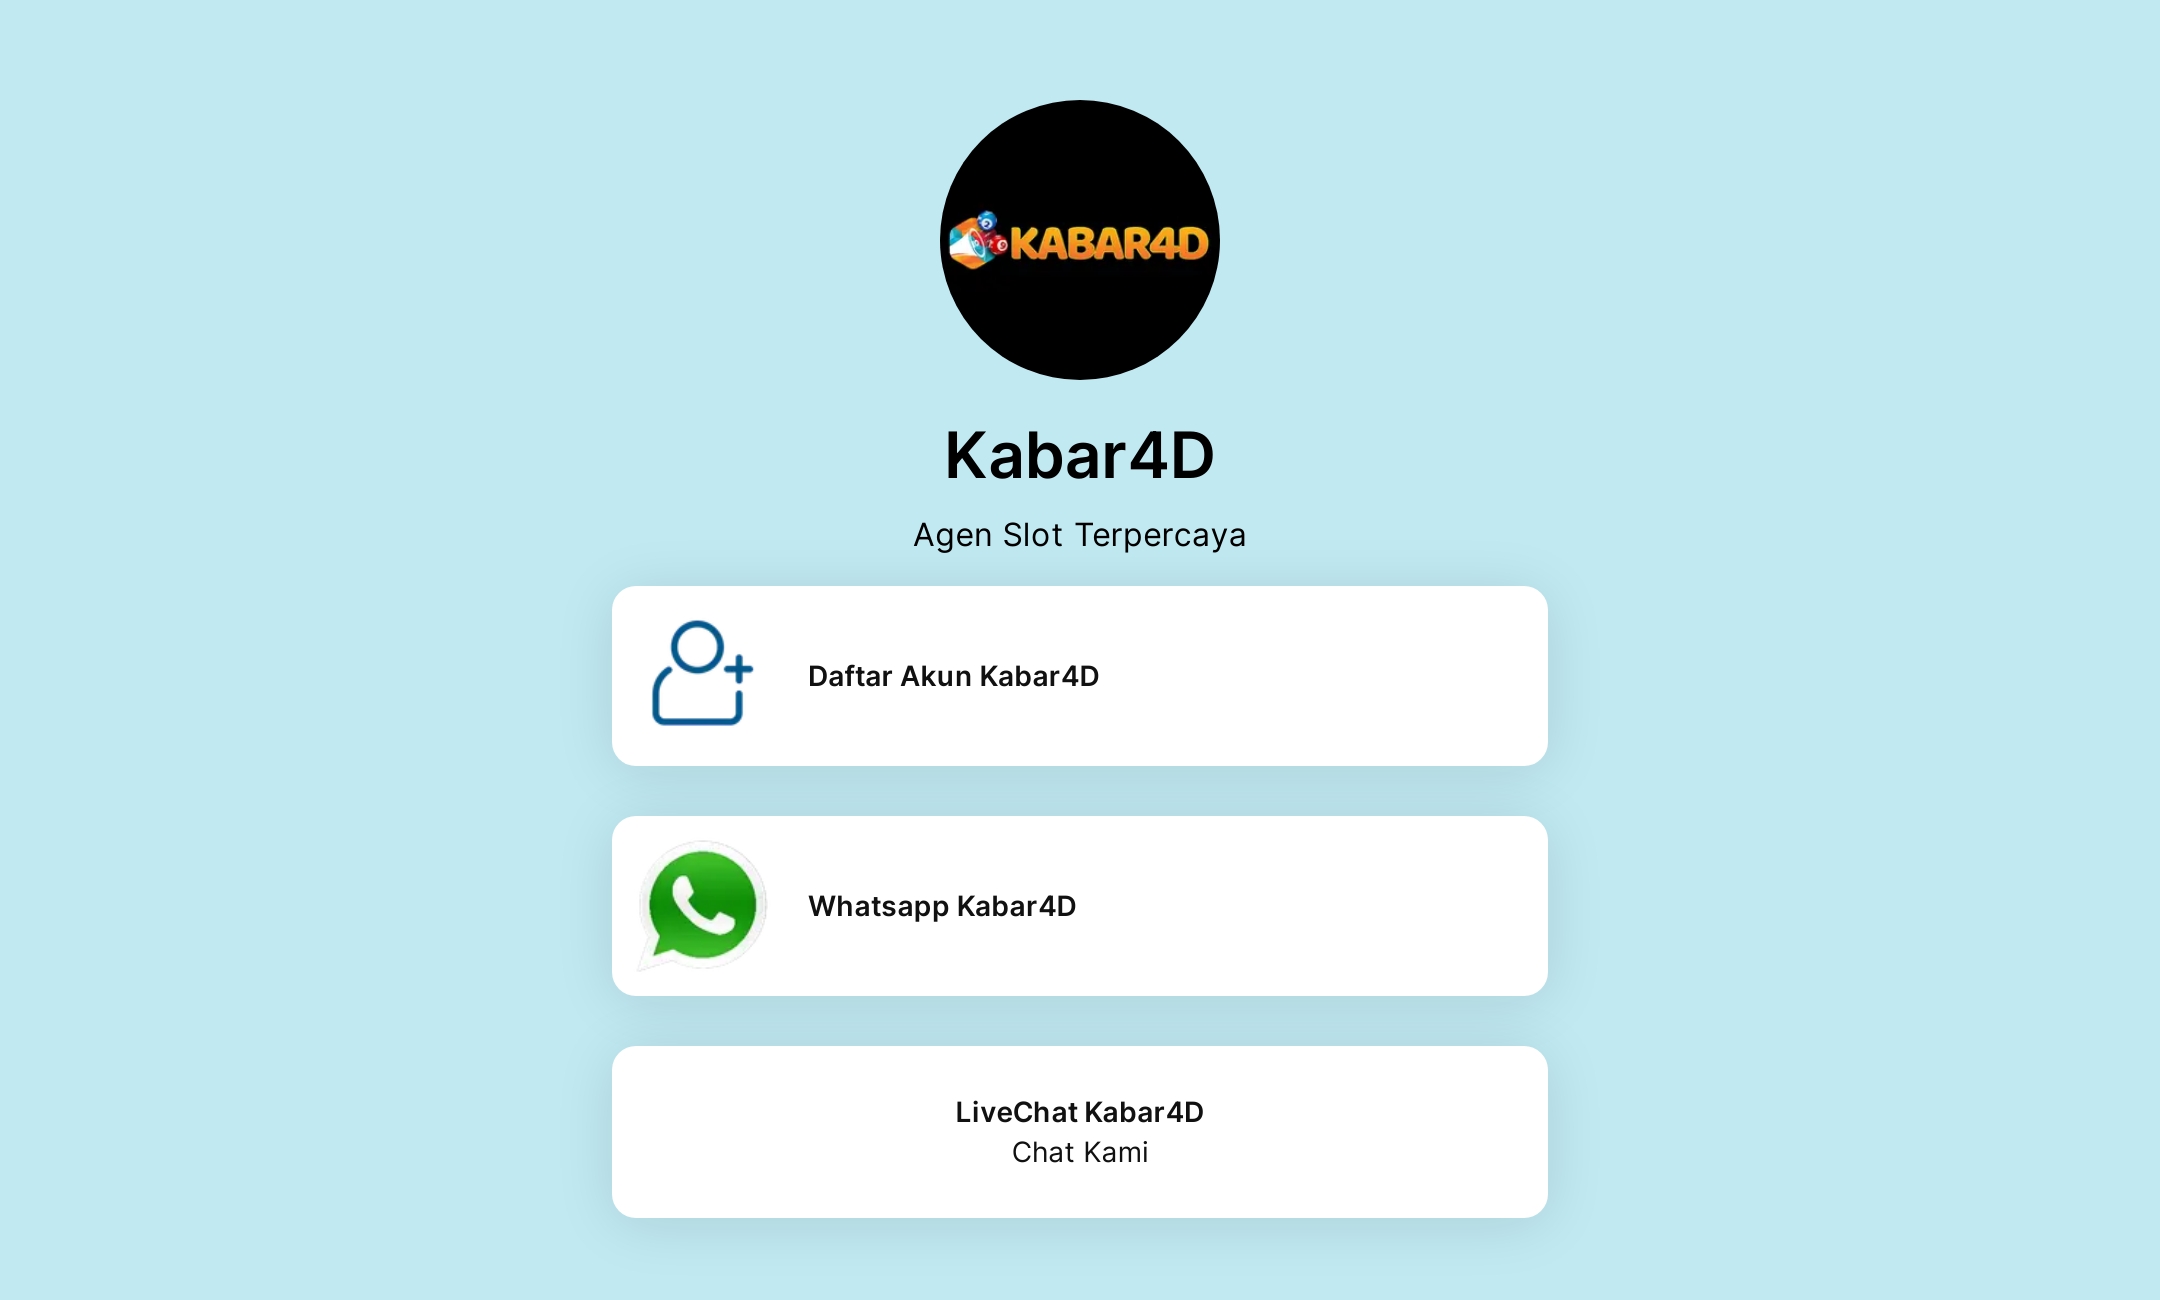 Kabar4D's Flowpage